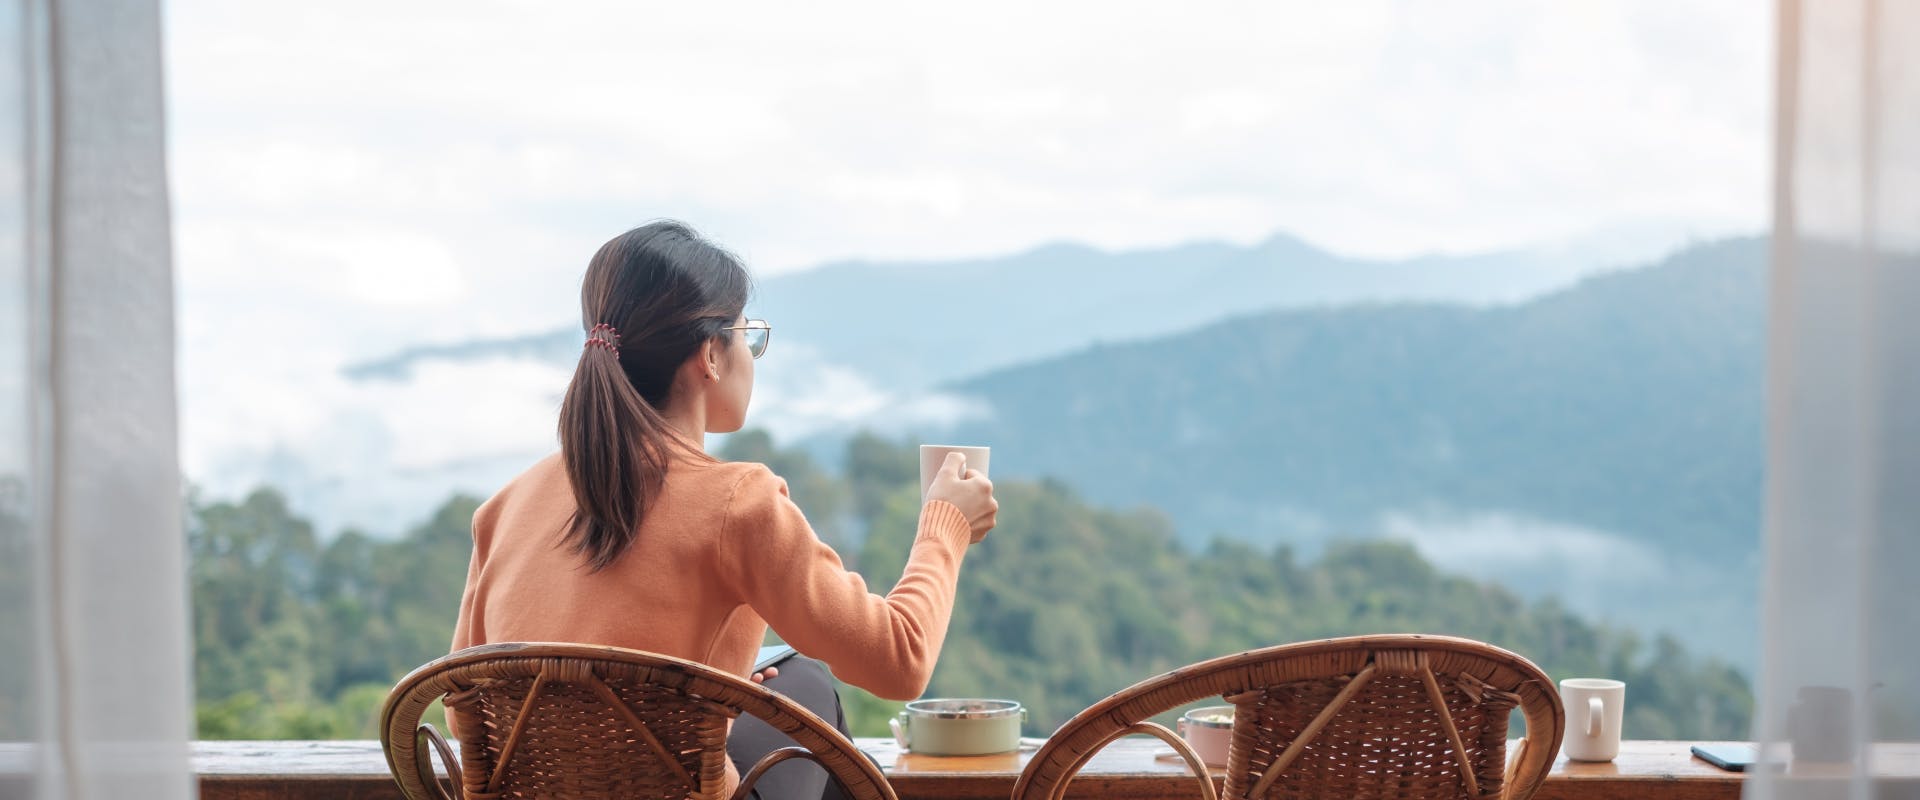 A woman enjoys a coffee with a view.